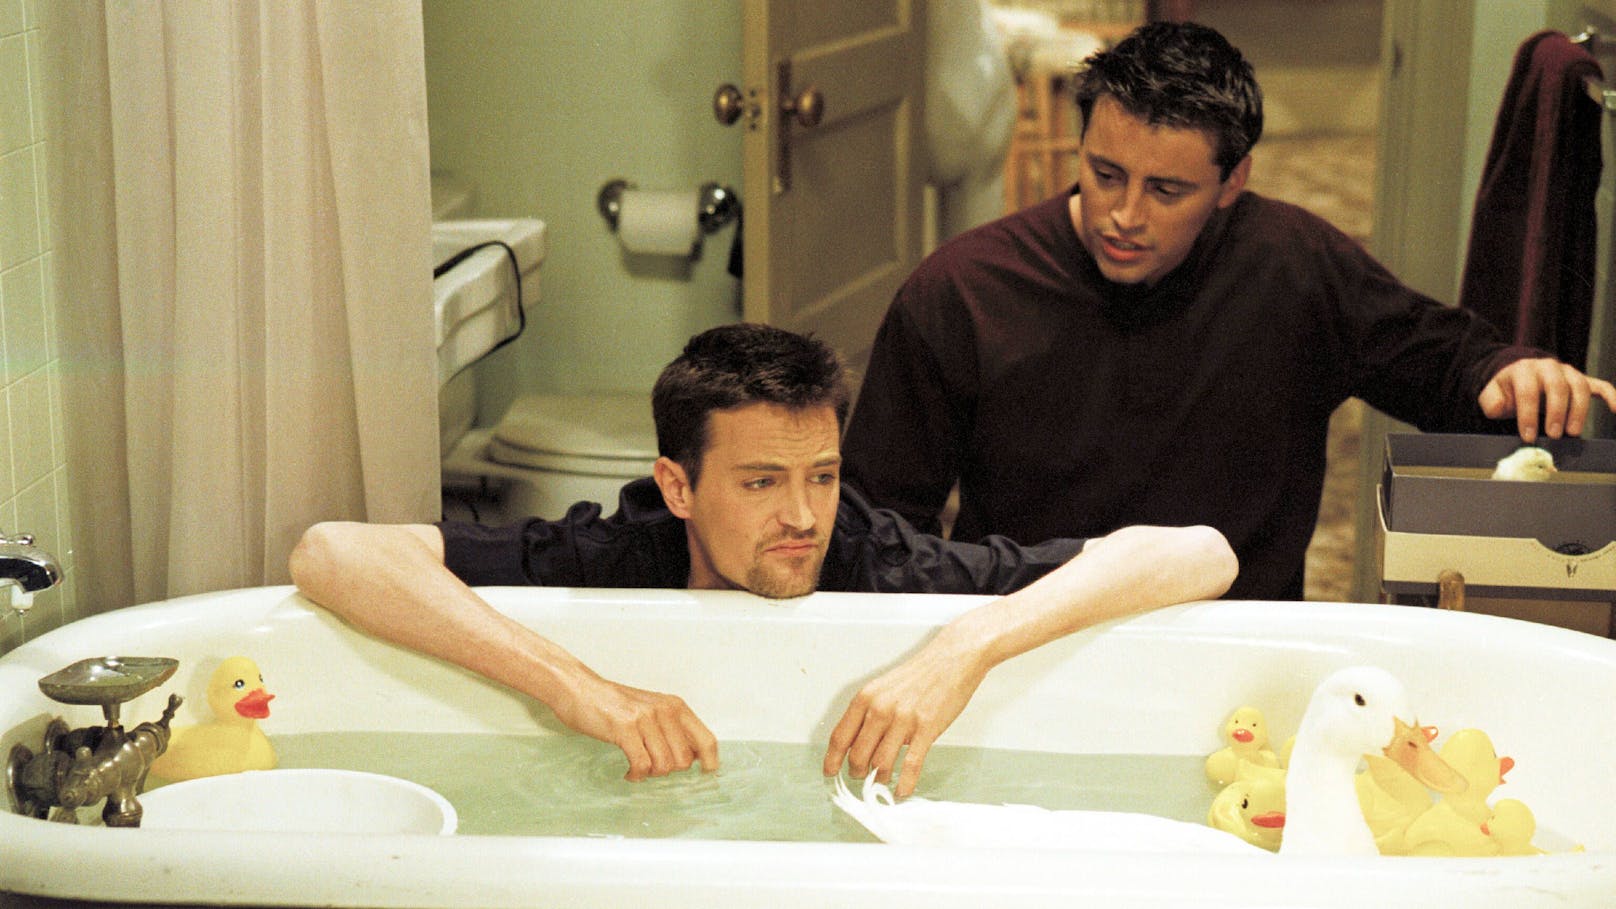 Matthew Perry und Matt LeBlanc in der "Friends"-Folge "The One With A Chick & A Duck".